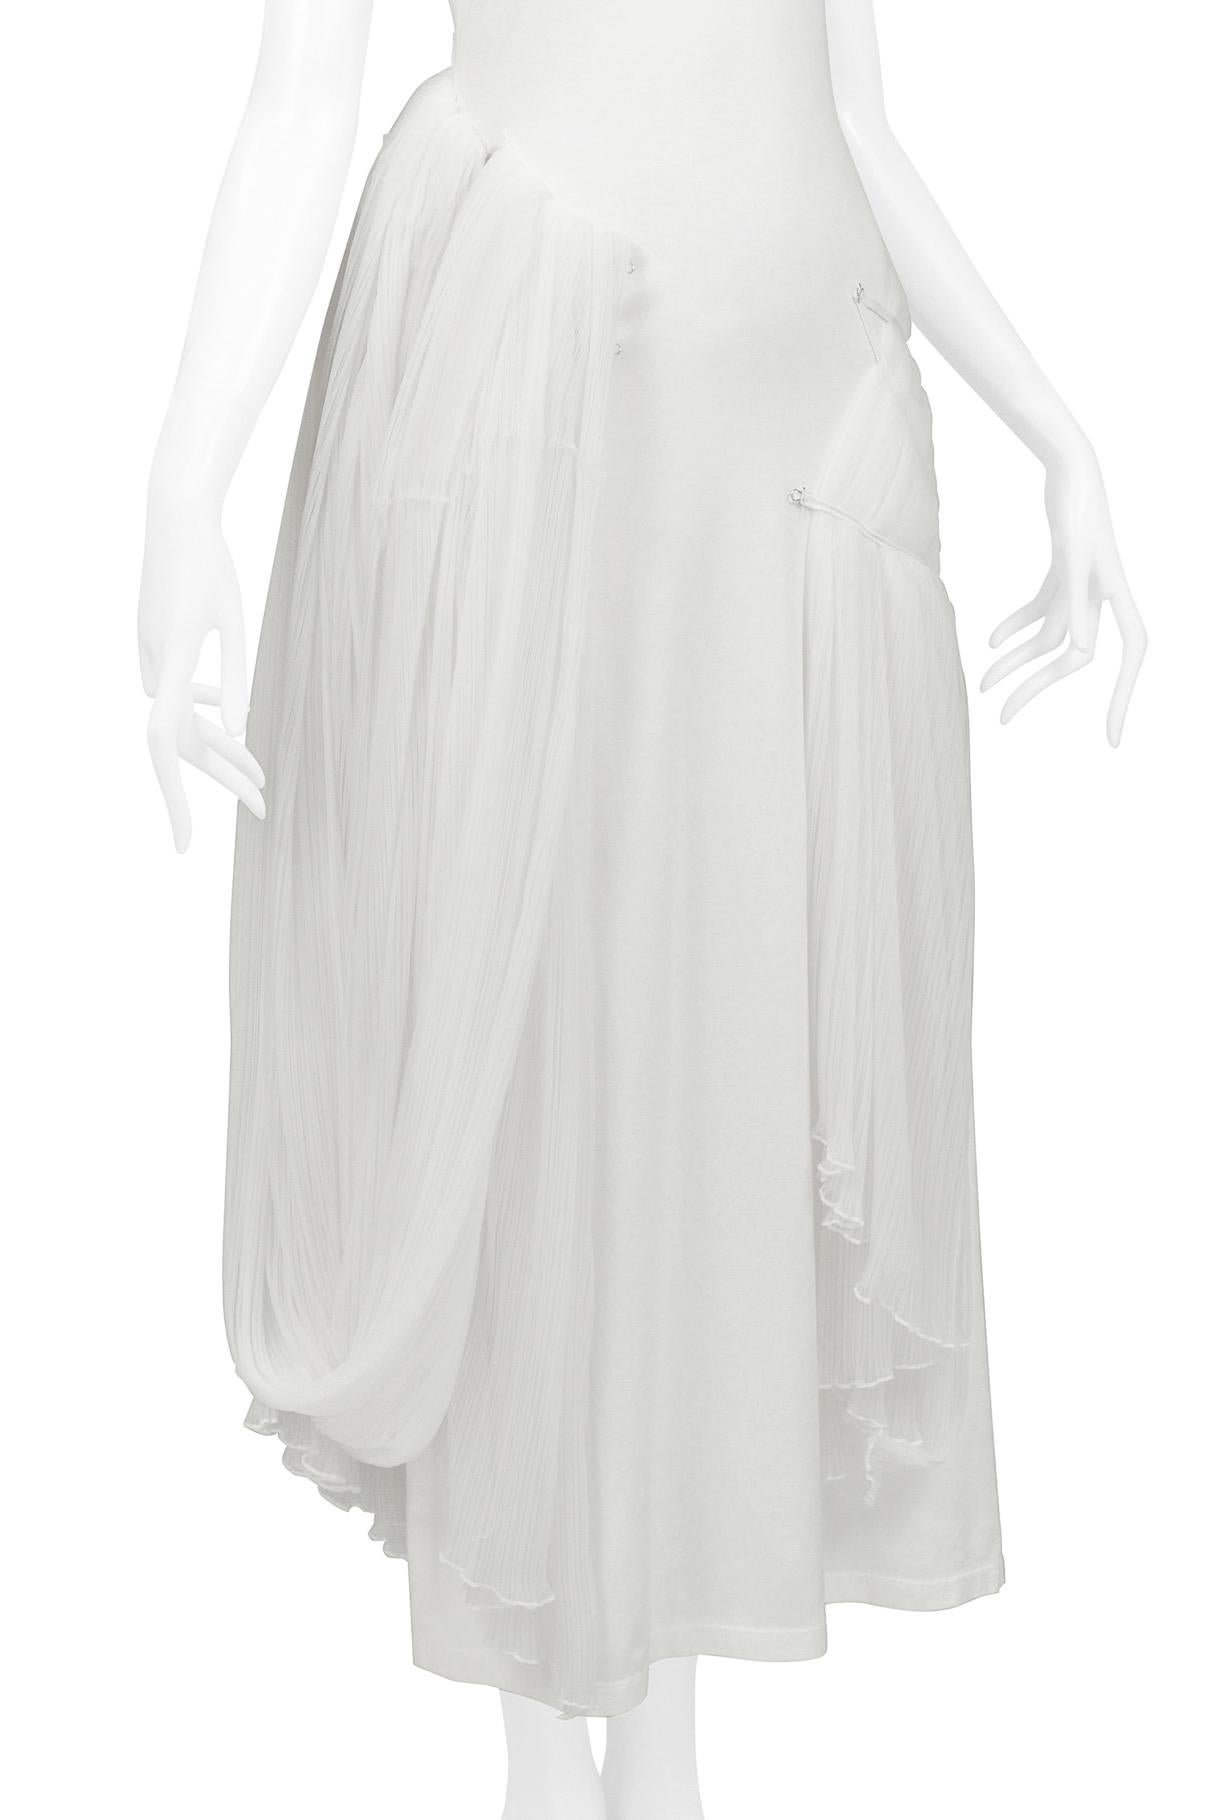 Issey Miyake Iconic White Goddess Concept Dress 2003 For Sale 3